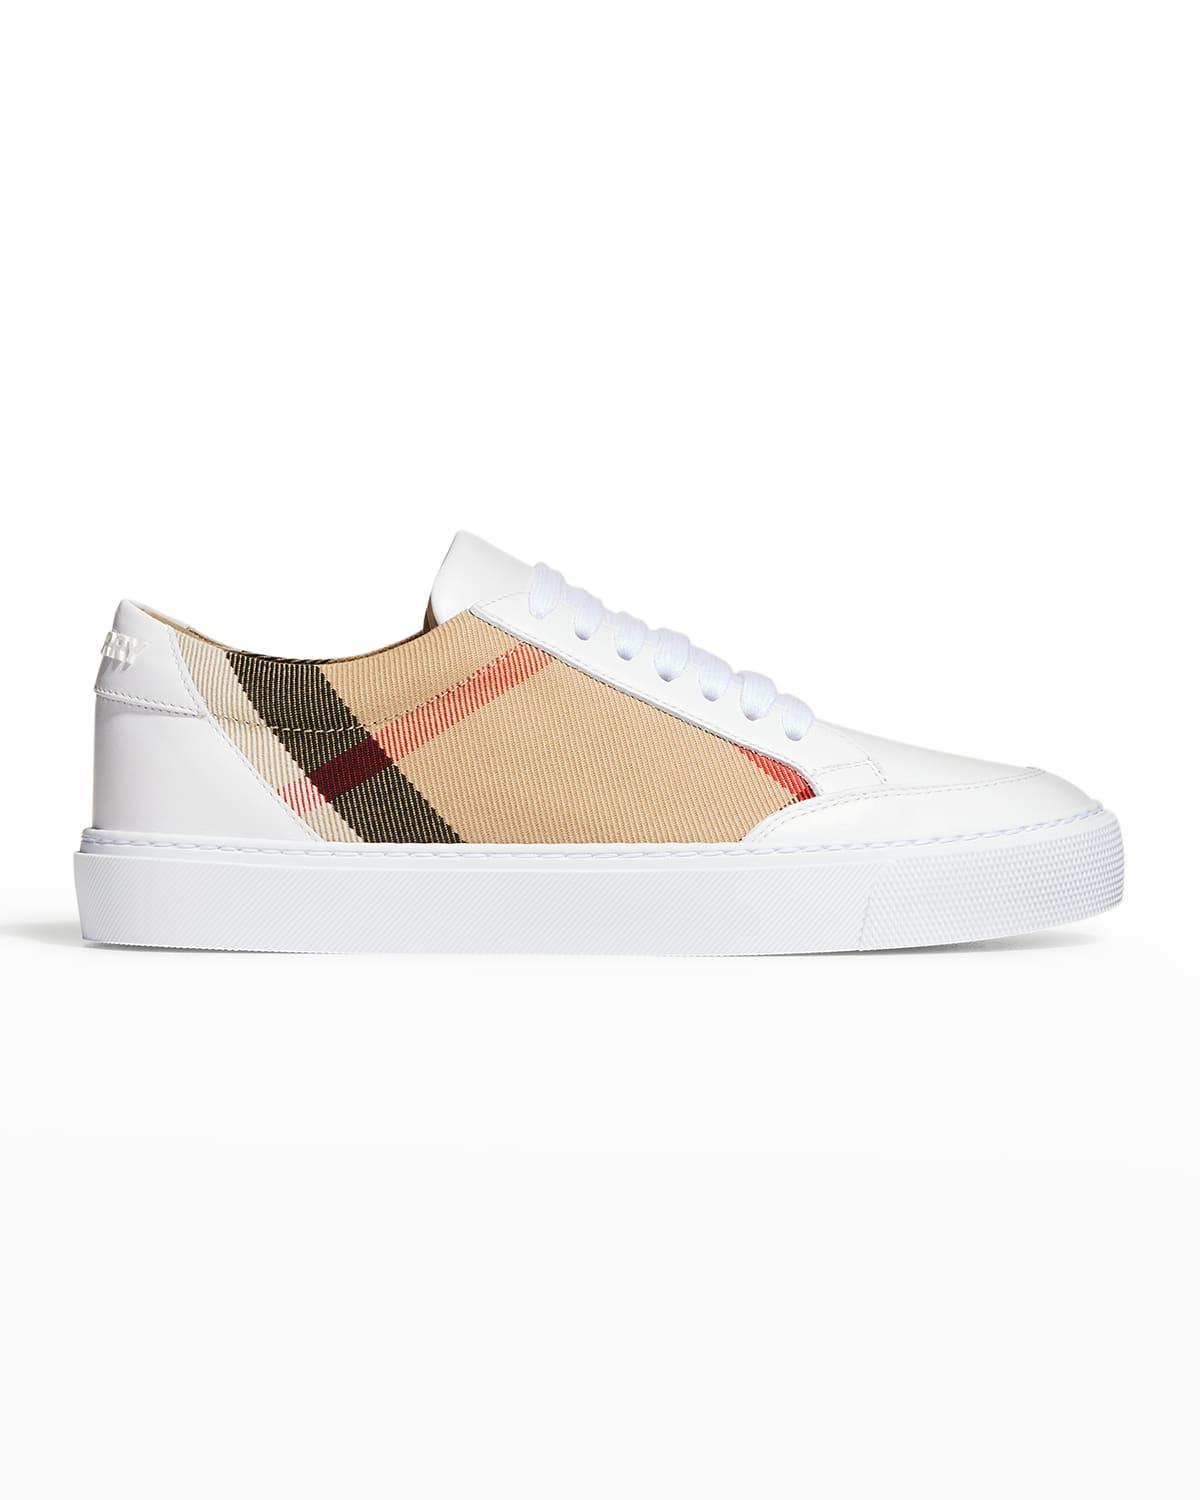 burberry Salmond Check Low Top Sneaker Product Image